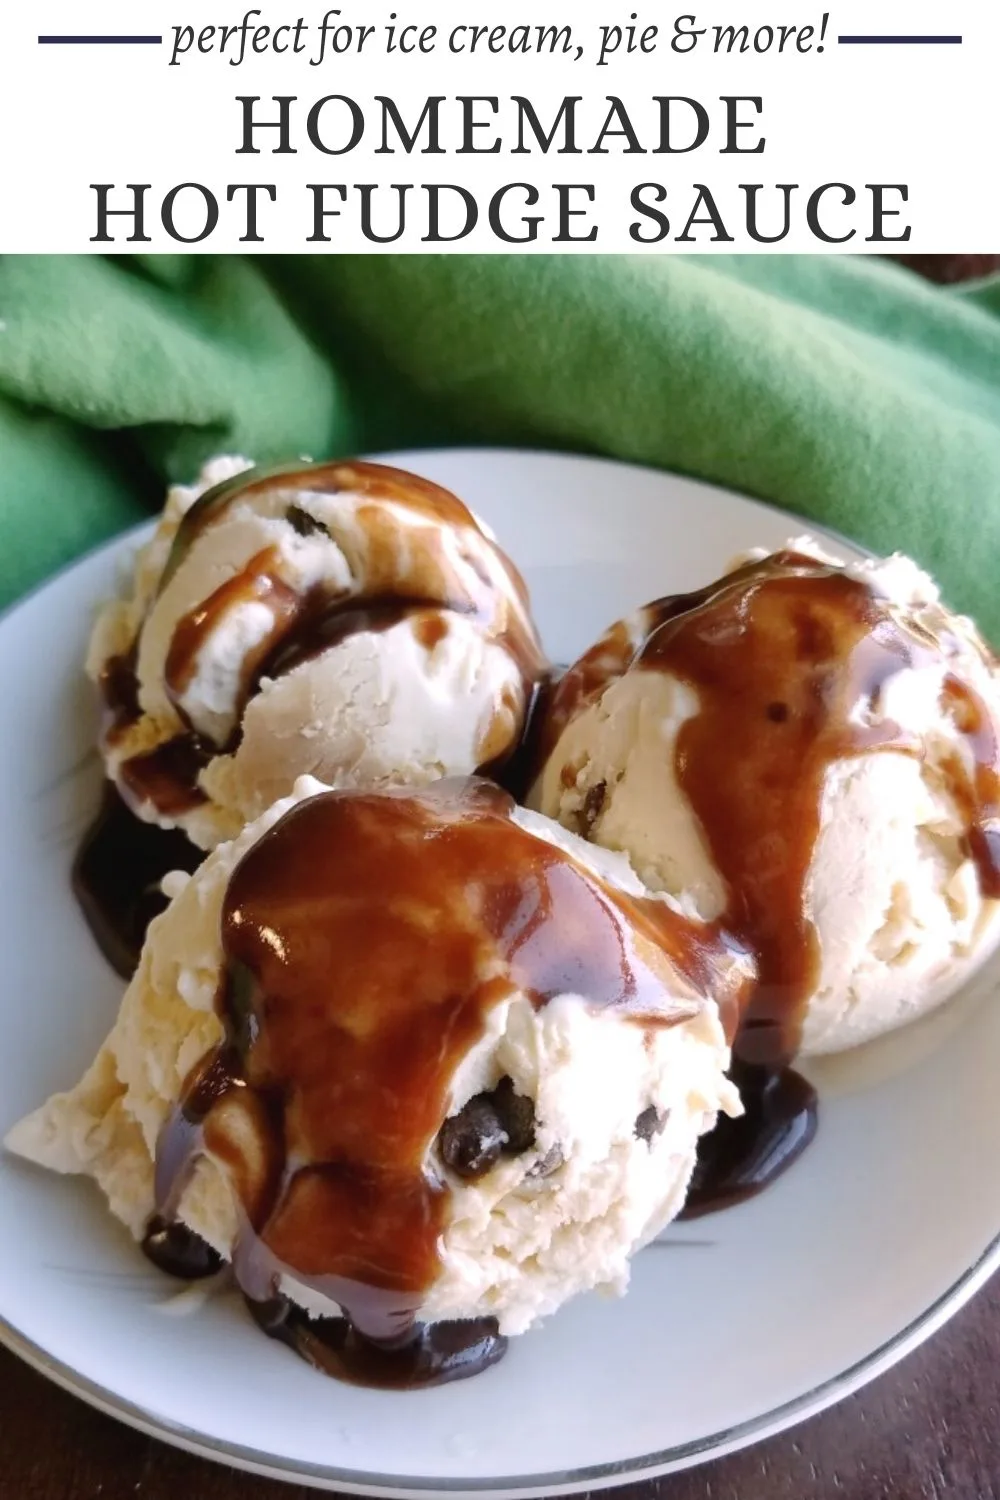 Easy homemade hot fudge sauce comes together in minutes with ingredients you probably have on hand.  It is the perfect ice cream topping, but is also great drizzled over other desserts.